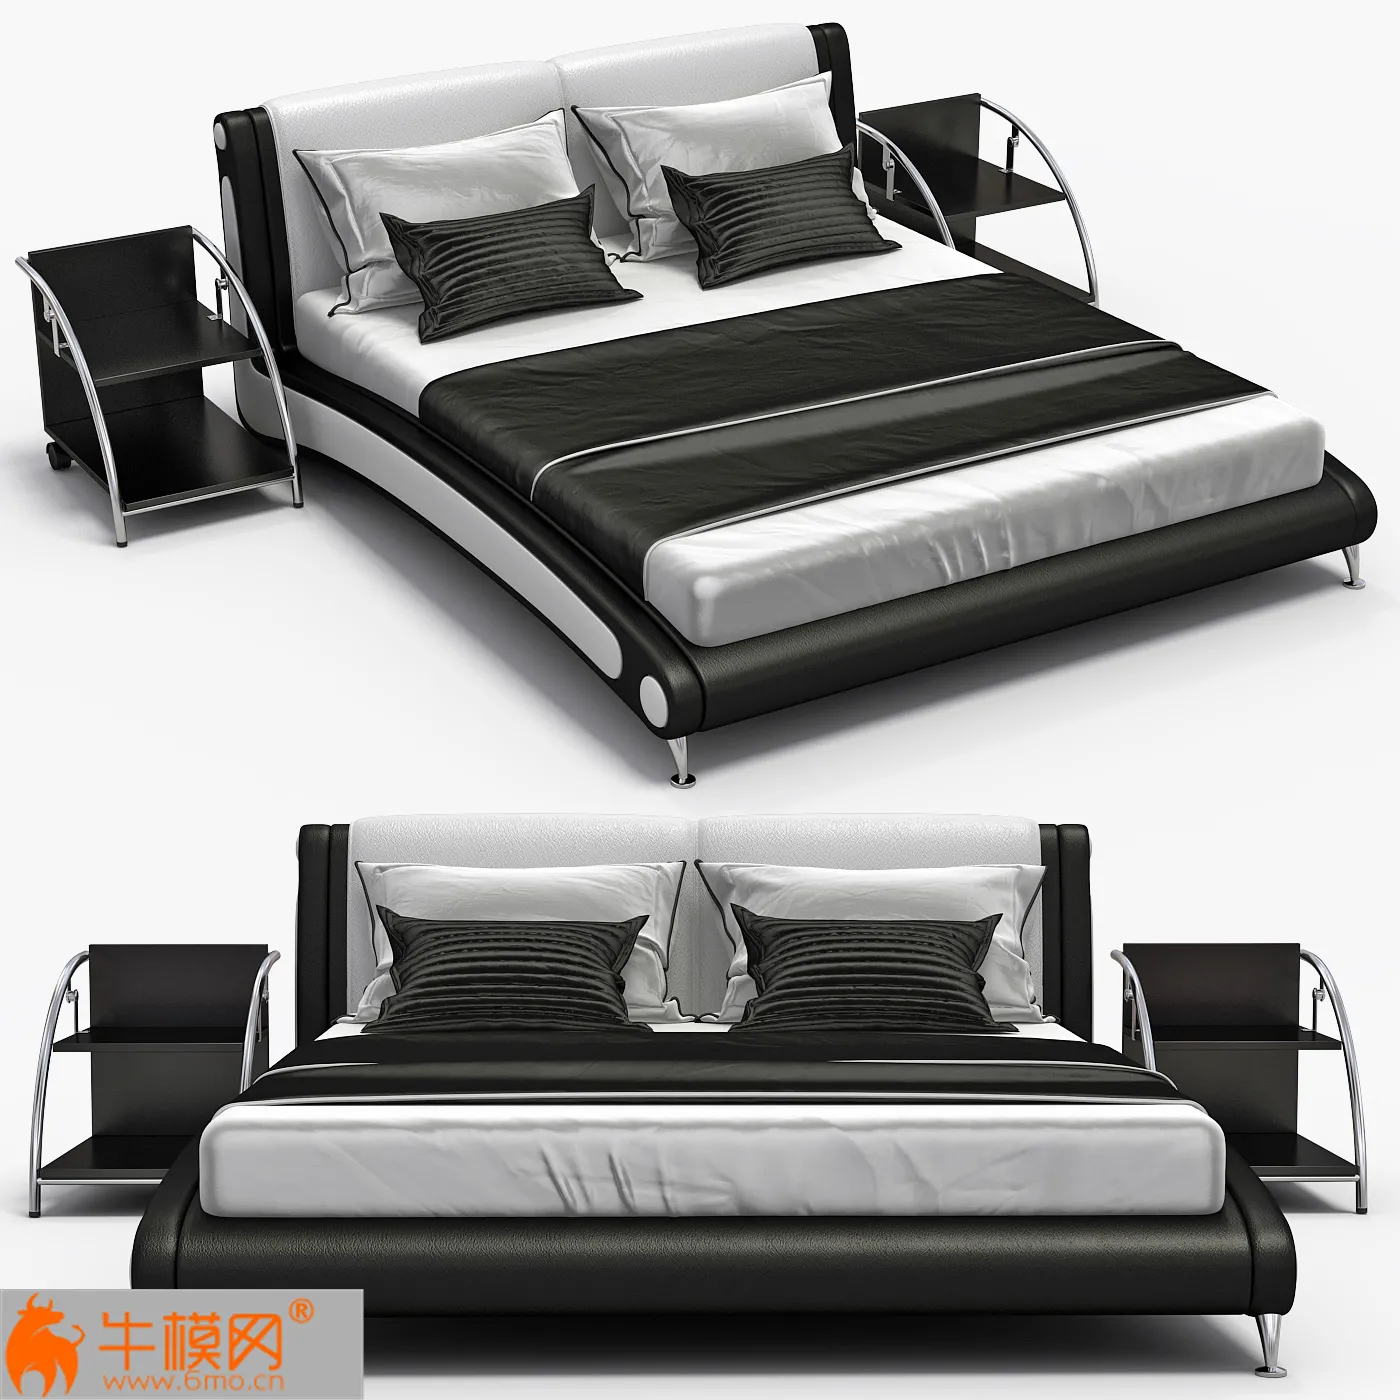 Leather bed Aonidisi 959 – 3748